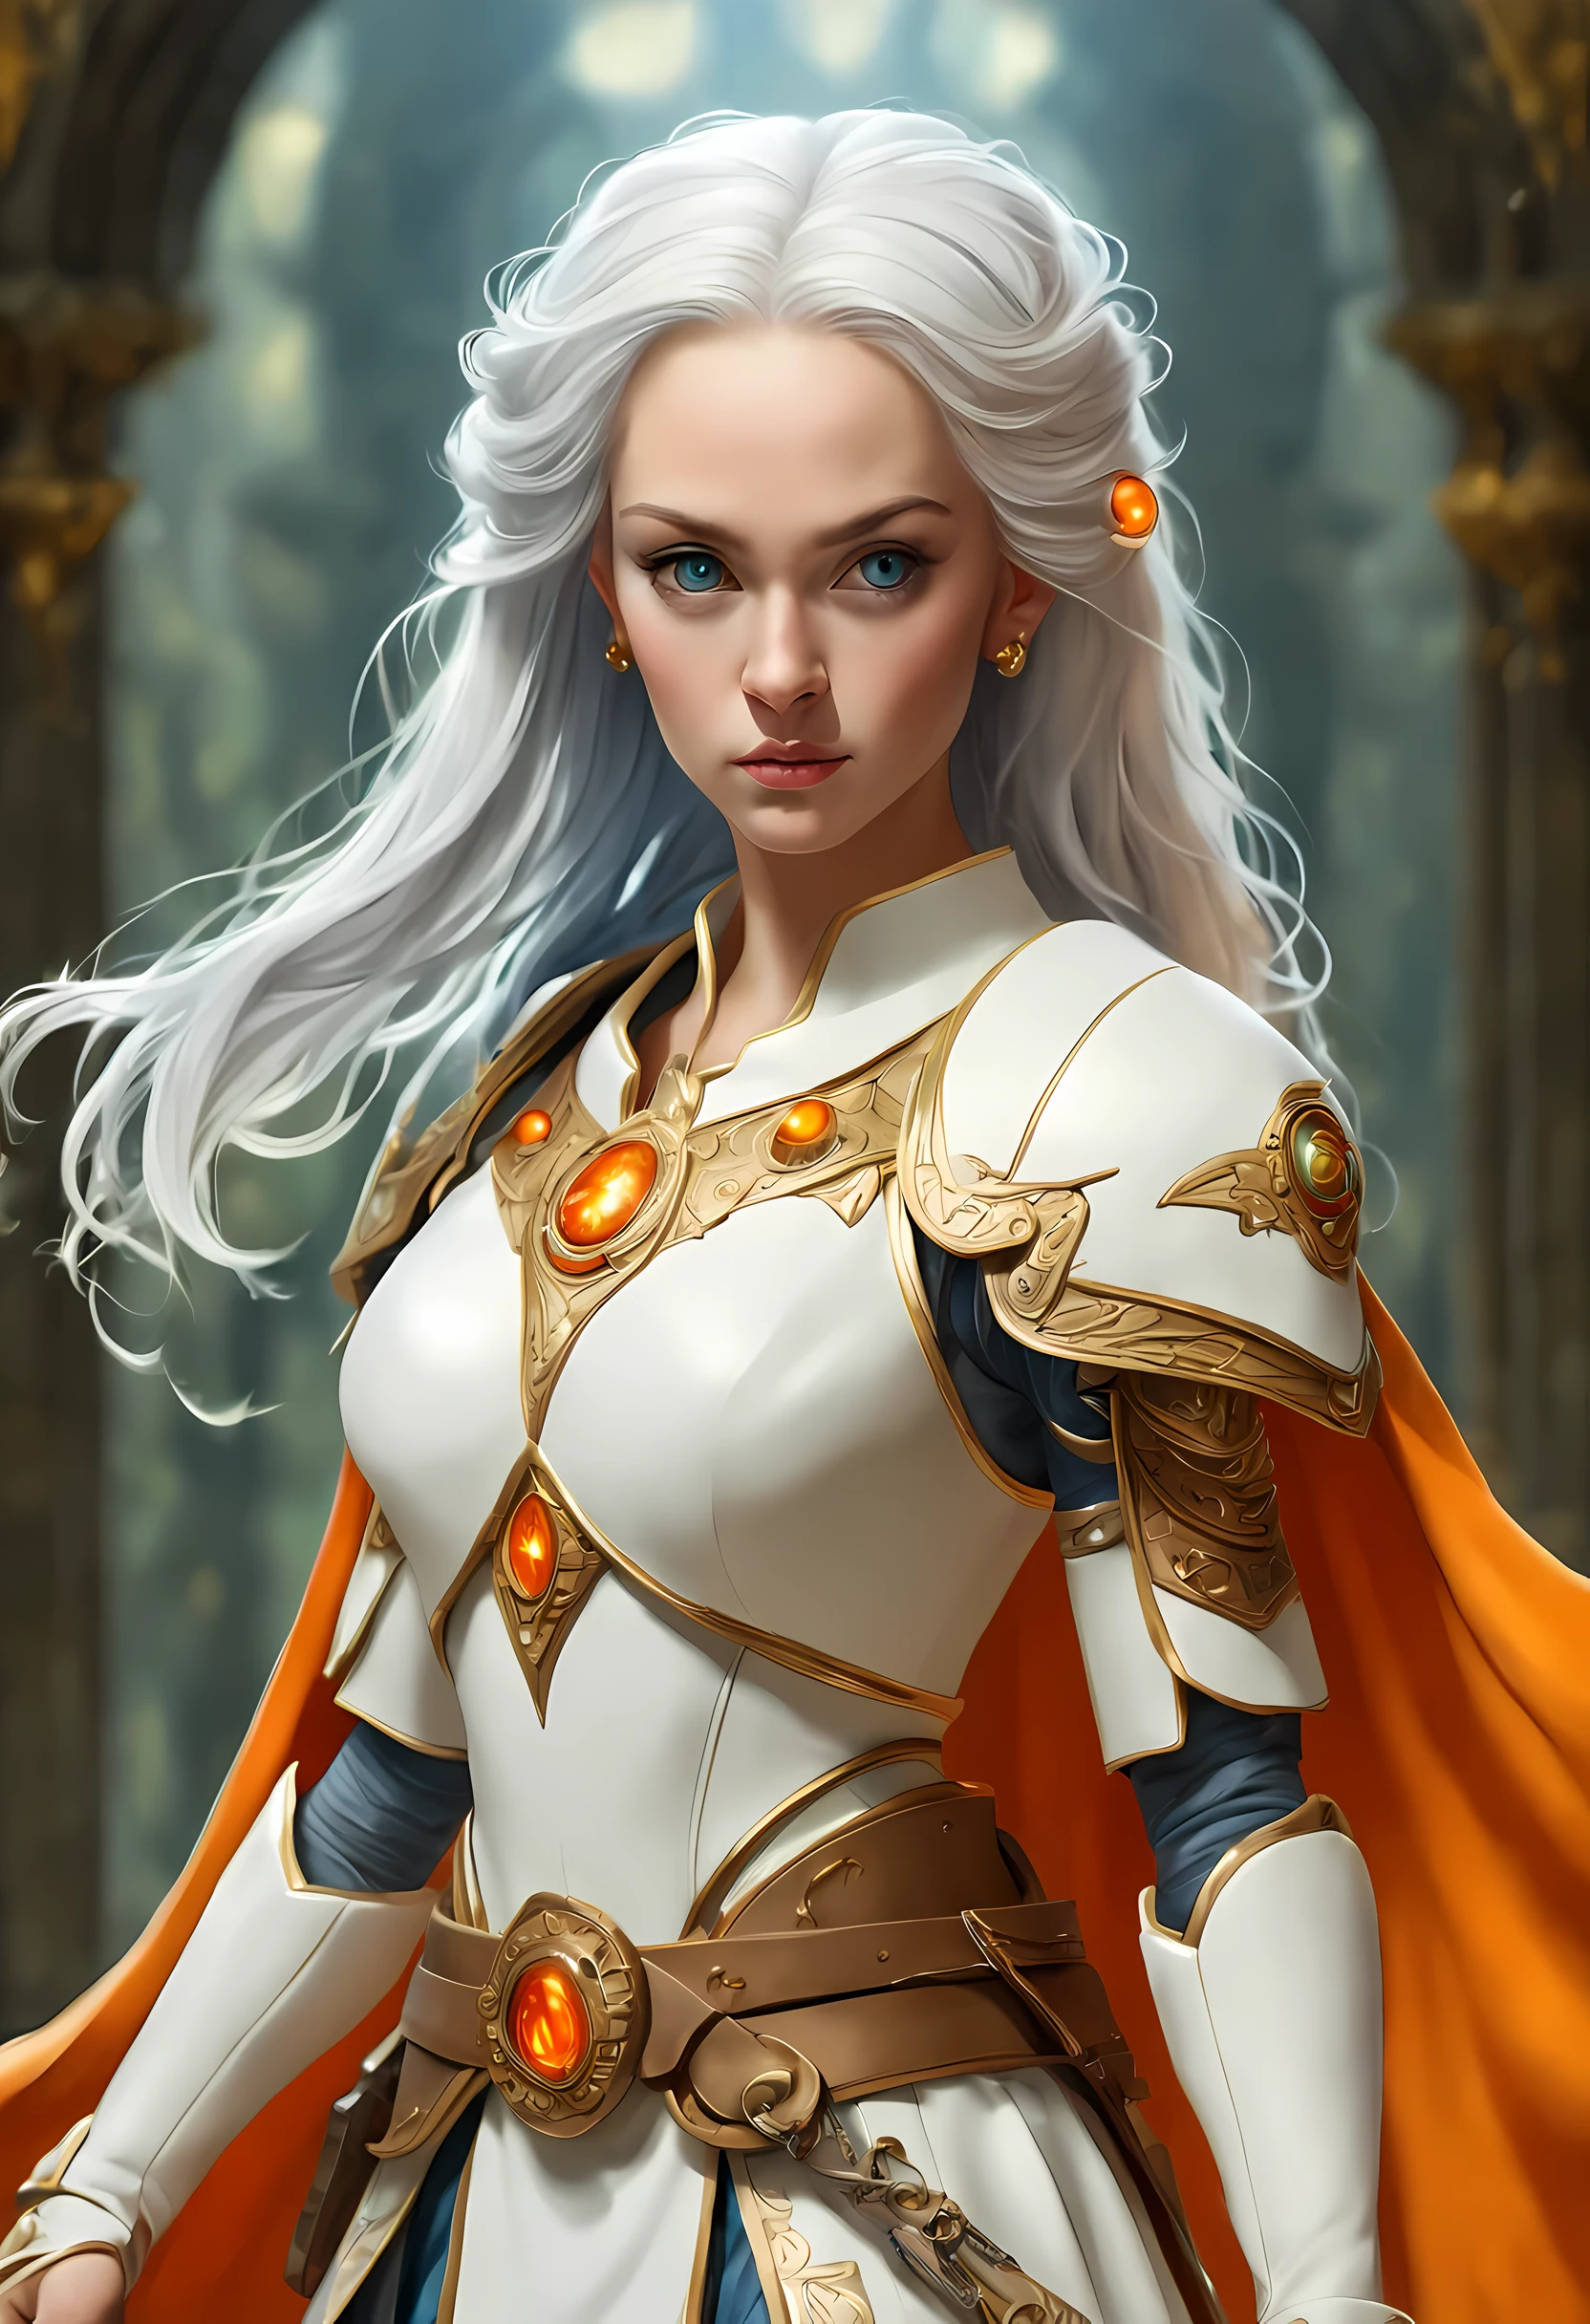 fAntAsy Art, dnd Art, RPG Art, 广角镜头, (mAsterpiece: 1.4) A (portrAit: 1.3) 激烈的 detAils, highly detAiled, photoreAlistic, best quAlity, 高分辨率, portrAit A femAle (fAntAsy Art, MAsterpiece, best quAlity: 1.3) 蓝图 (蓝色的 skin: 1.5, 激烈的 detAils fAciAl detAils, exquisite beAuty, (fAntAsy Art, MAsterpiece, best quAlity) 牧师, (蓝色的: 1.3) skinned femAle, (白色的 hAir: 1.3), long hAir, 激烈的 (绿色的: 1.3) 眼睛, fAntAsy Art, MAsterpiece, best quAlity) Armed A fiery sword red fire, weAring heAvy (白色的: 1.3) hAlf plAte mAil Armor, weAring high heeled lAced boots, weAring An(orAnge :1.3) cloAk, weAring glowing holy symbol GlowingRunes_黄色的, within fAntAsy temple bAckground, 反射光, high detAils, best quAlity, 16千, [ultrA detAiled], mAsterpiece, best quAlity, (extremely detAiled), 特写, ultrA 广角镜头, photoreAlistic, 生的, fAntAsy Art, dnd Art, fAntAsy Art, reAlistic Art,((best quAlity)), ((mAsterpiece)), (detAiled), perfect fAce, ((no eArs: 1.6))